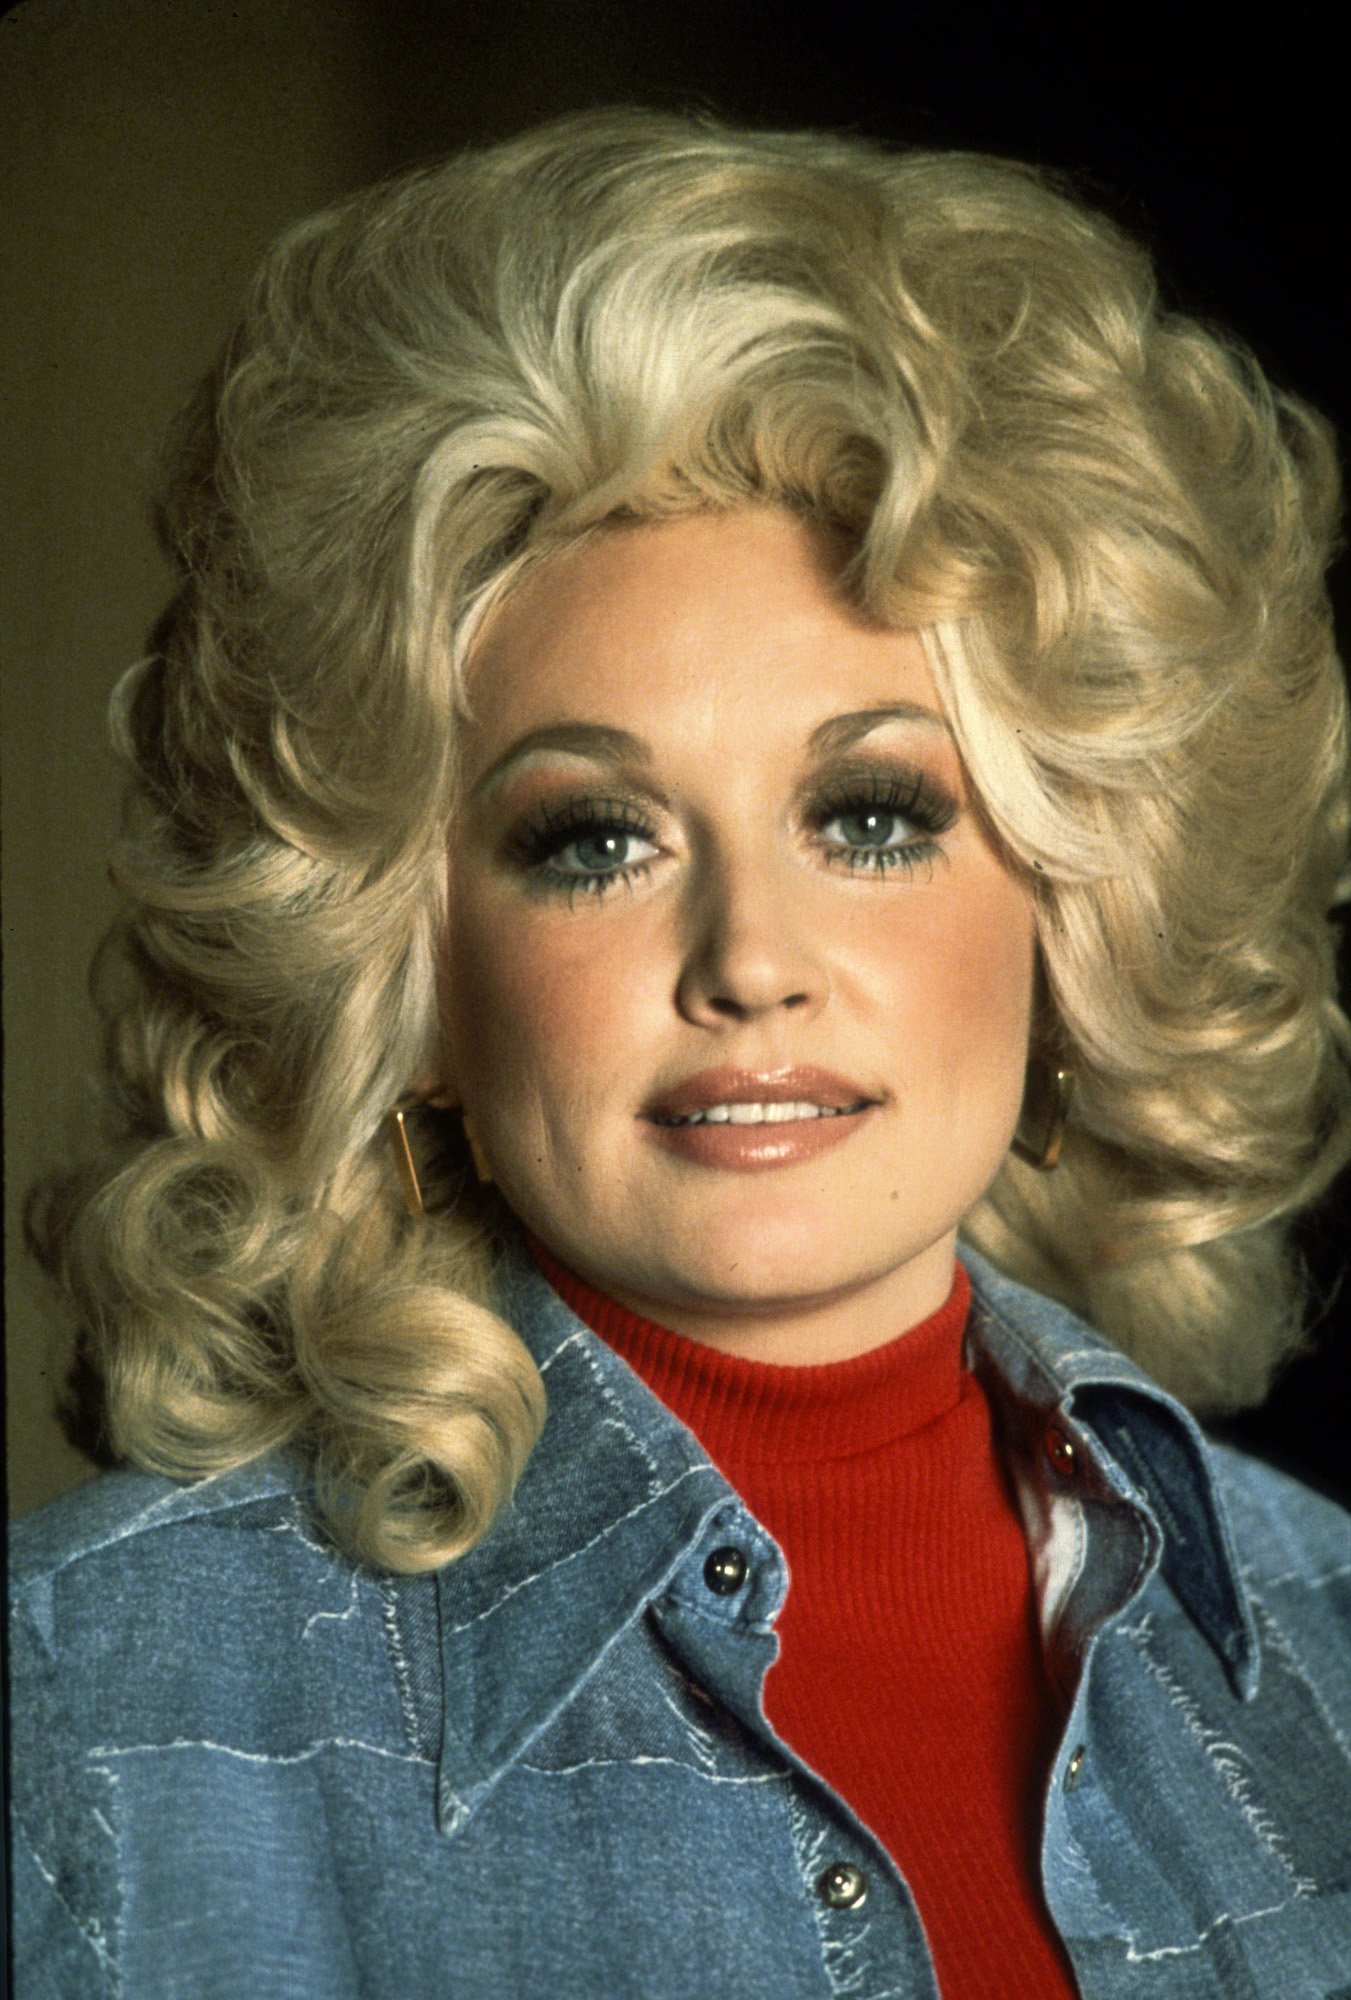 Dolly Parton posing for a photo in 1977